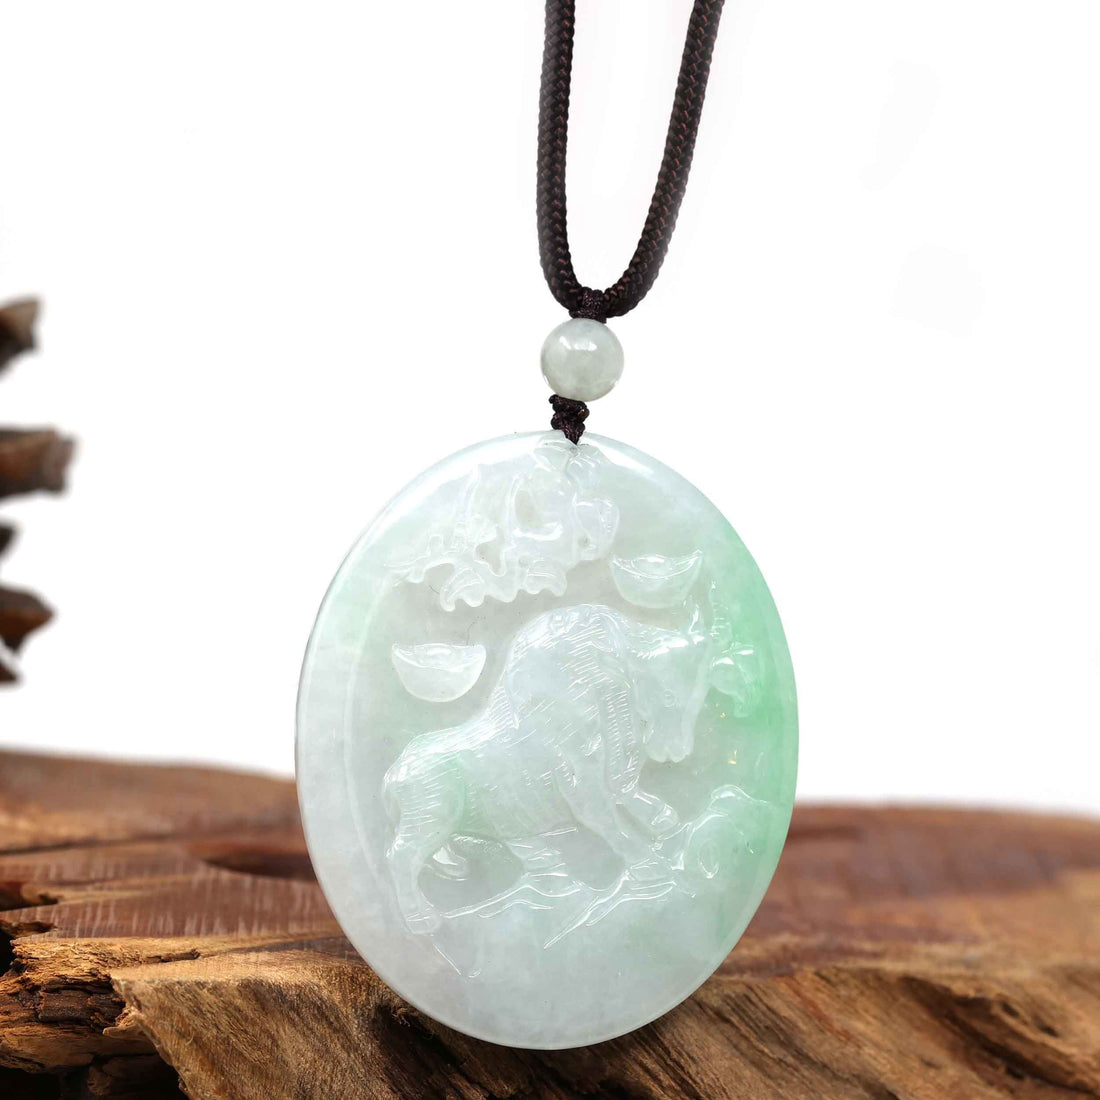 Baikalla Jewelry Jade Carving Necklace Copy of Copy of Natural Honey Yellow Jadeite Jade "Rooster" Pendant Necklace For Men, Collectibles.